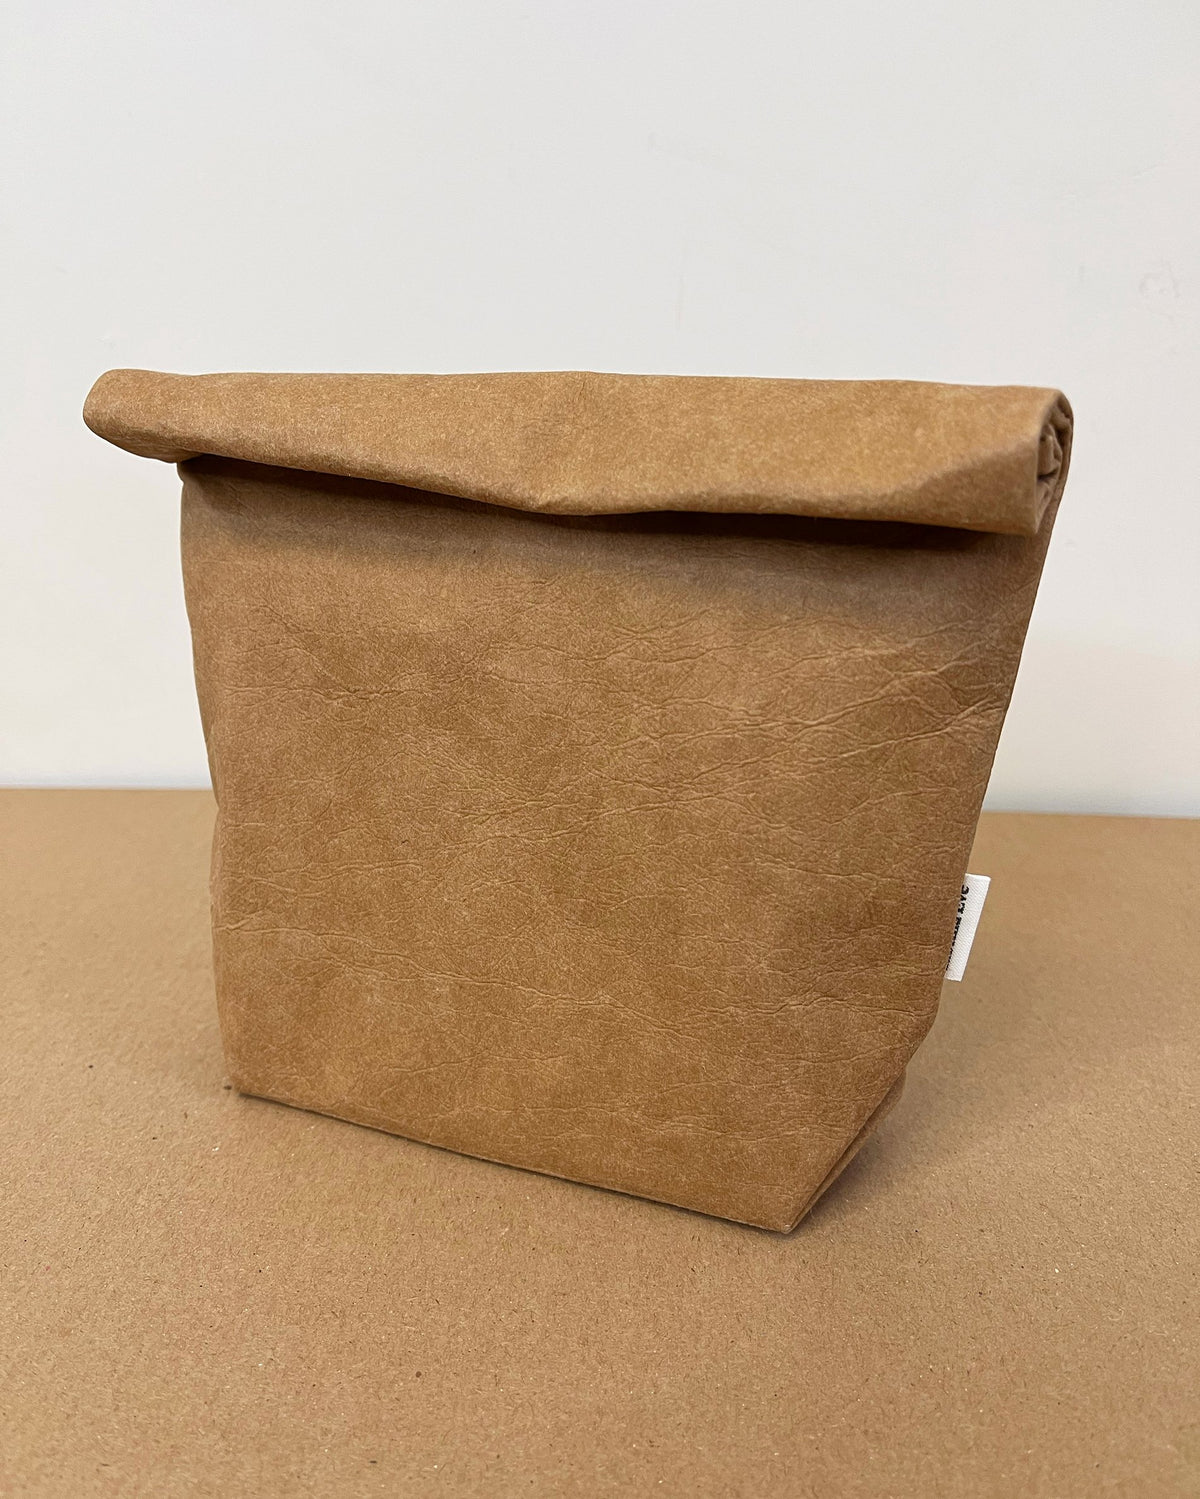 VEGAN LEATHER SNACK BAG by Tabitha Eve